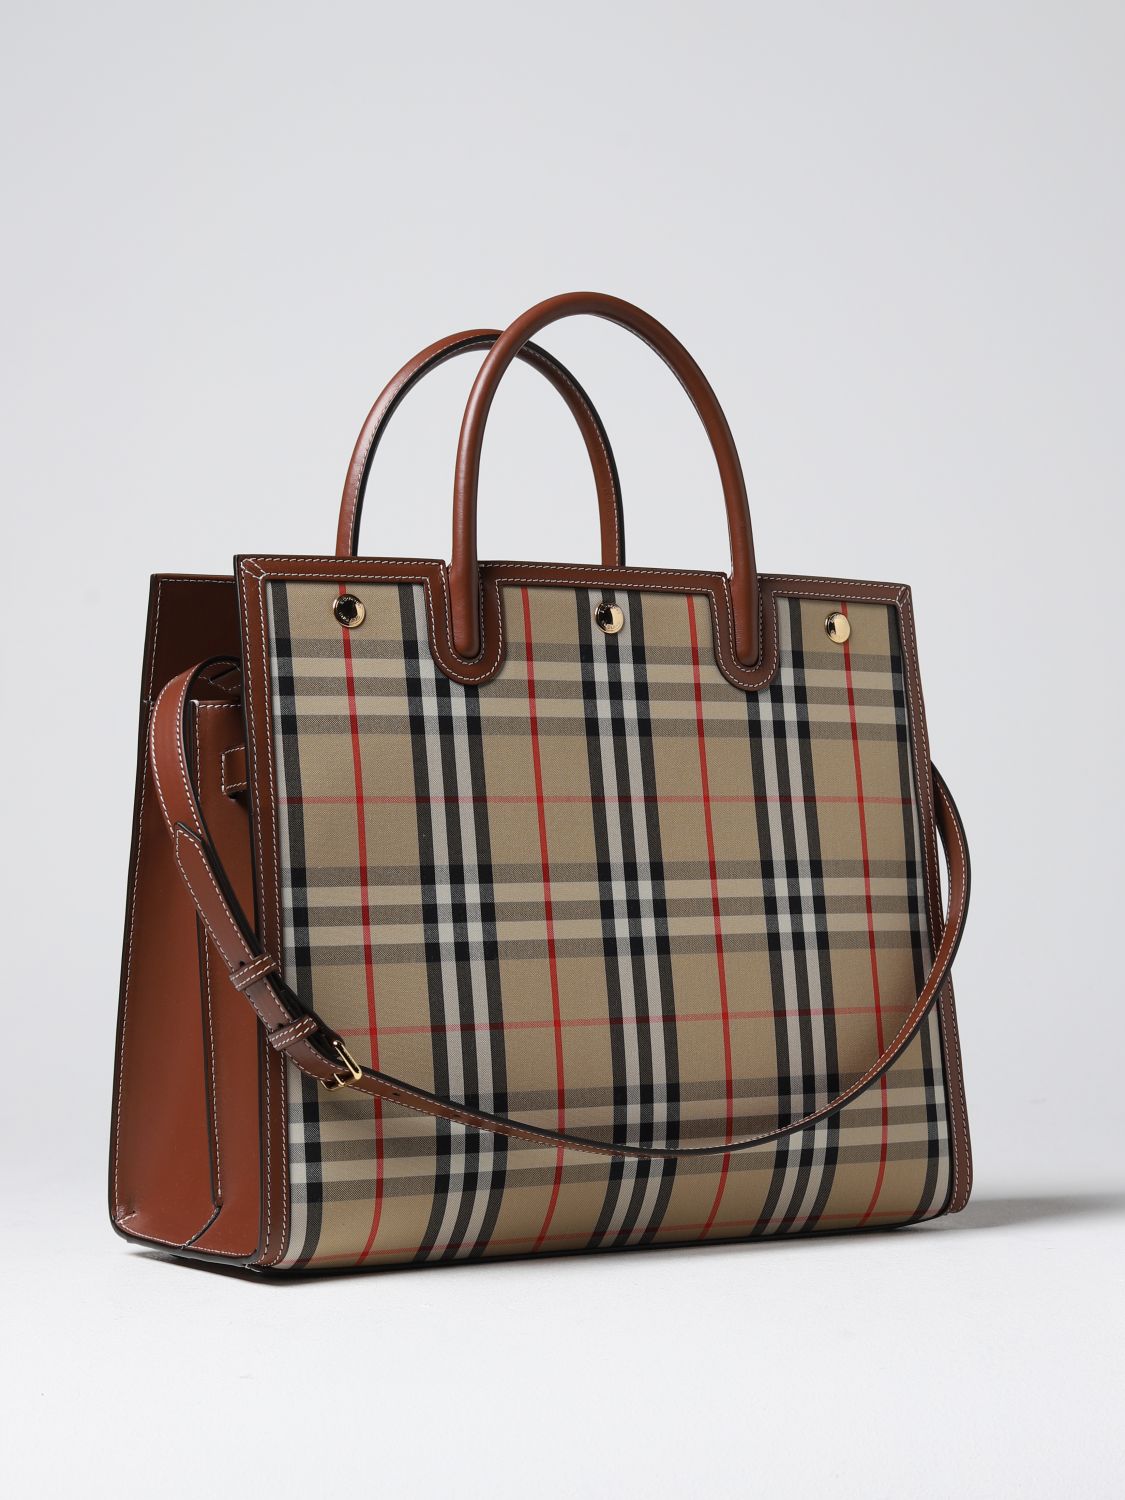 Burberry purse style tote bag set with wristlet